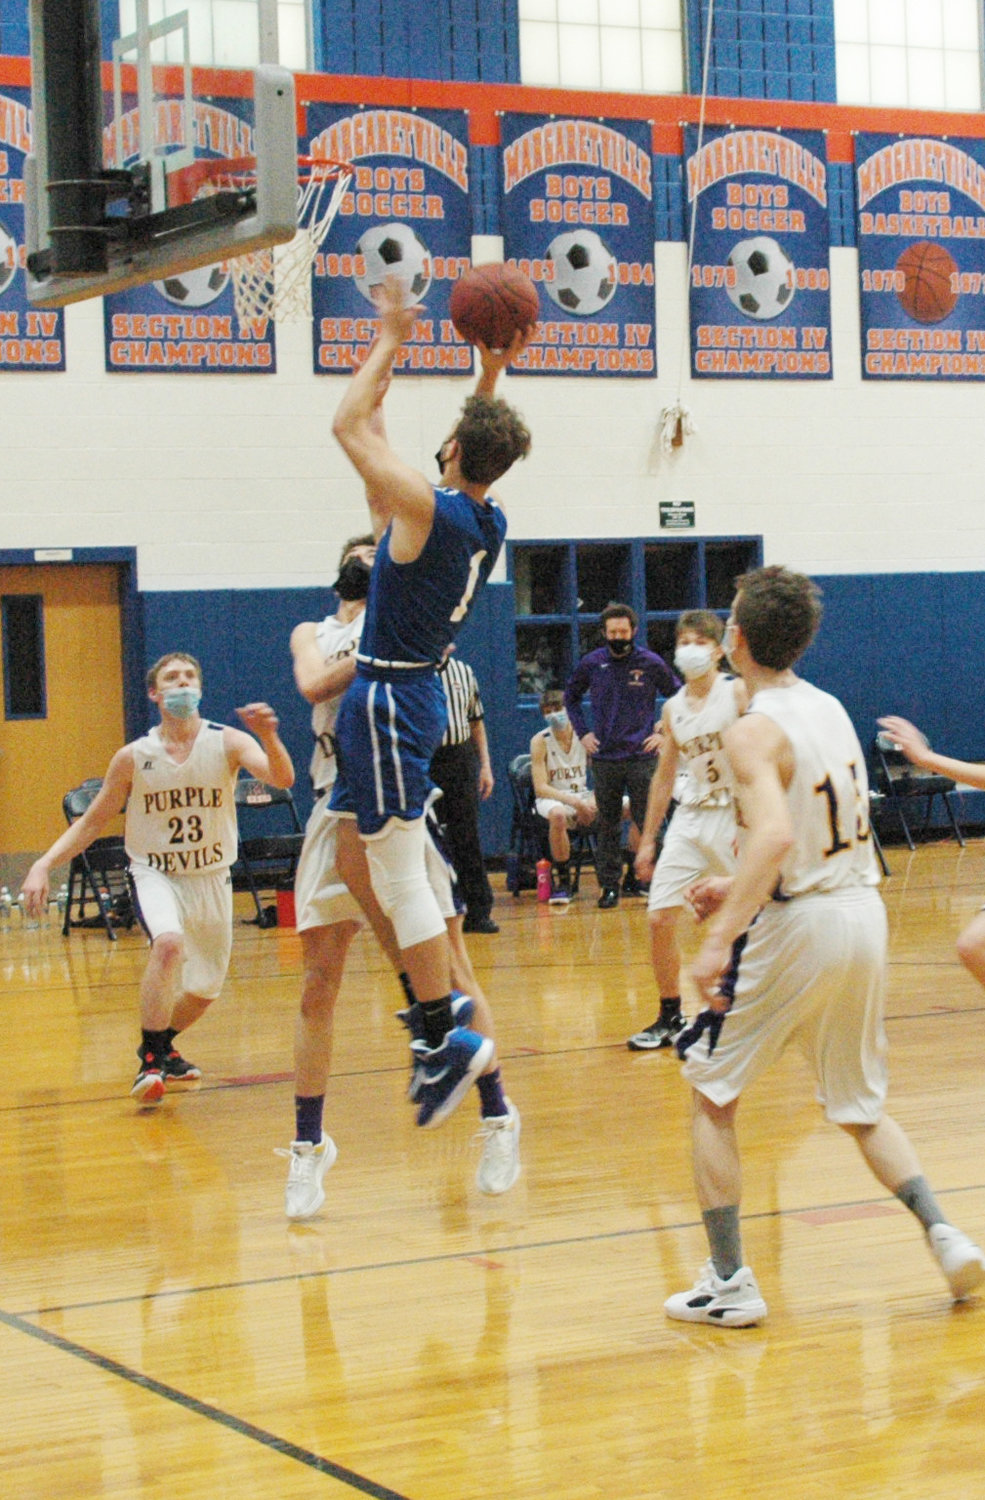 Anthony Teipelke goes up and over a defender to add two points. He scored 34 points in two games over the weekend.